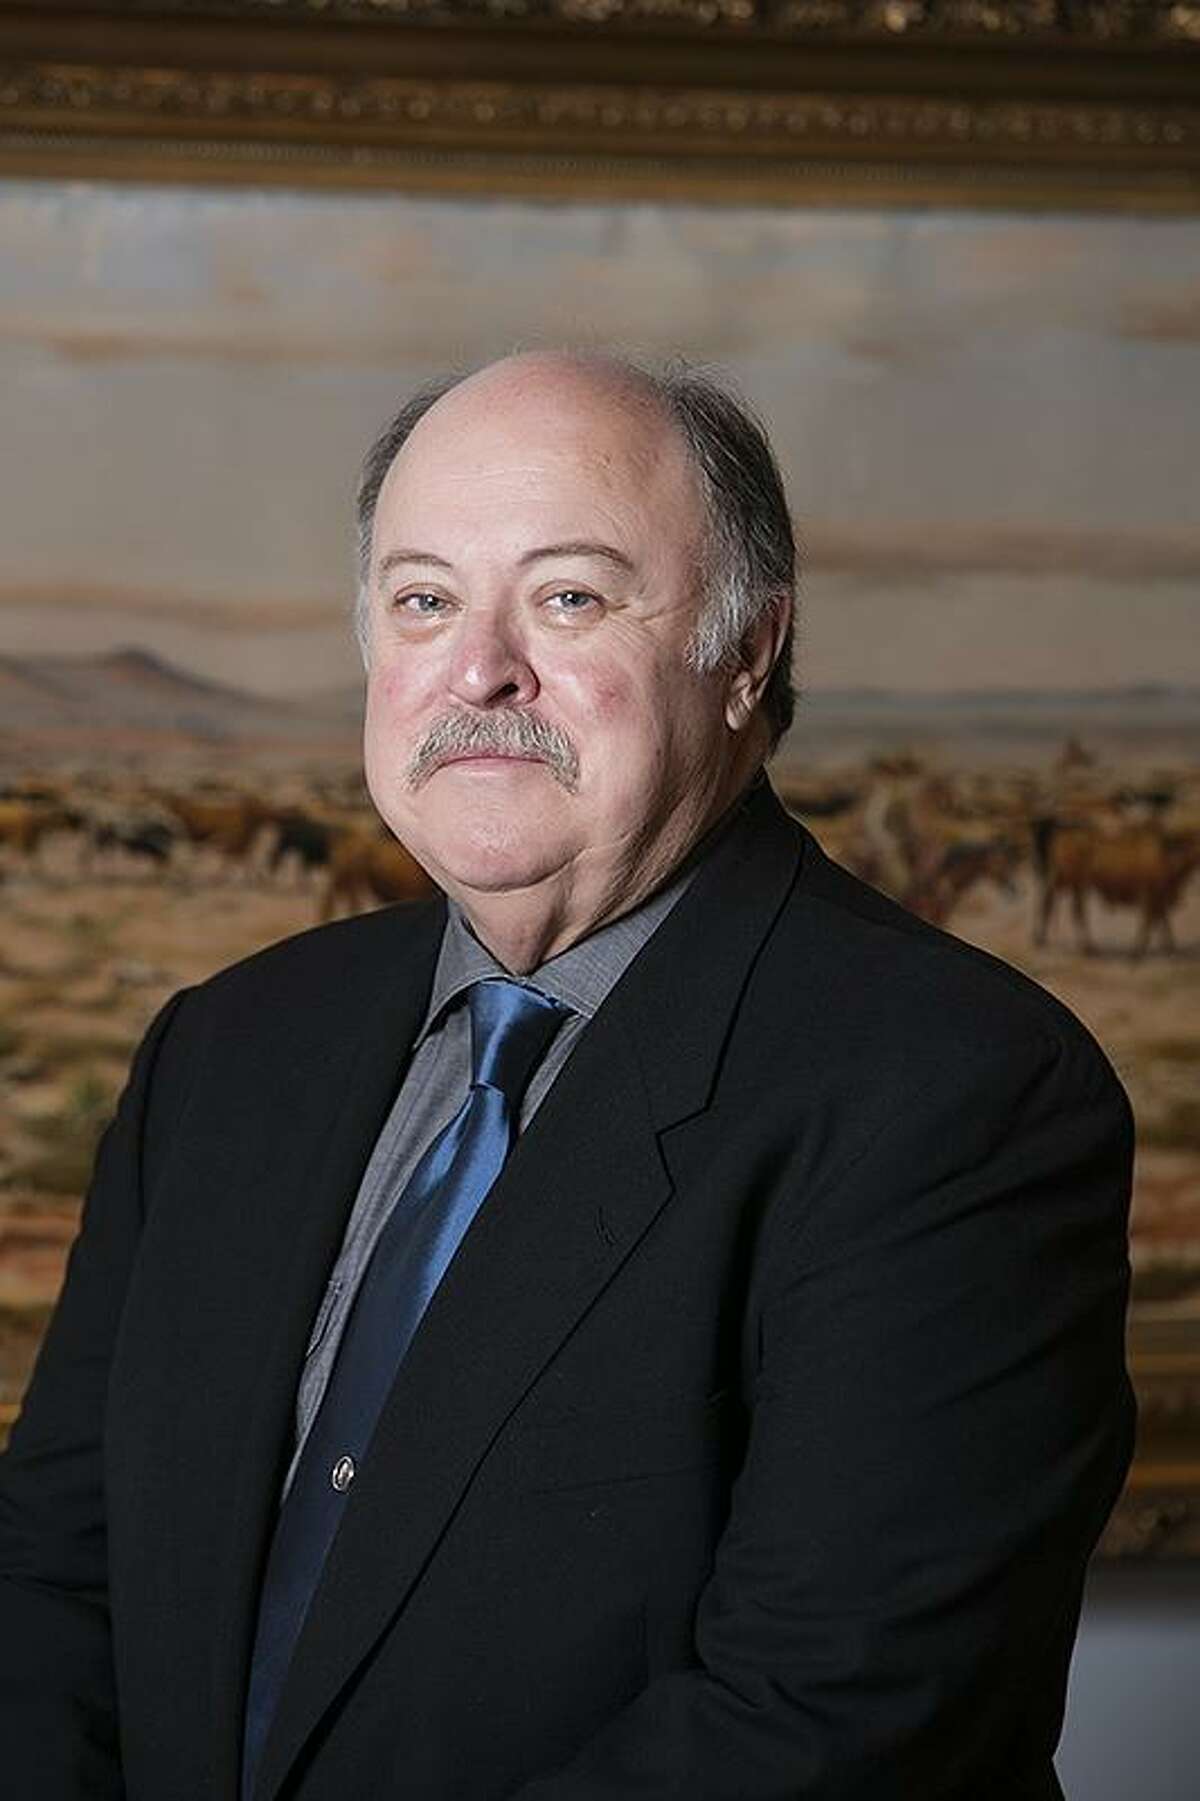 Bruce M. Shackelford, curator of South Texas Heritage at the Witte Museum.